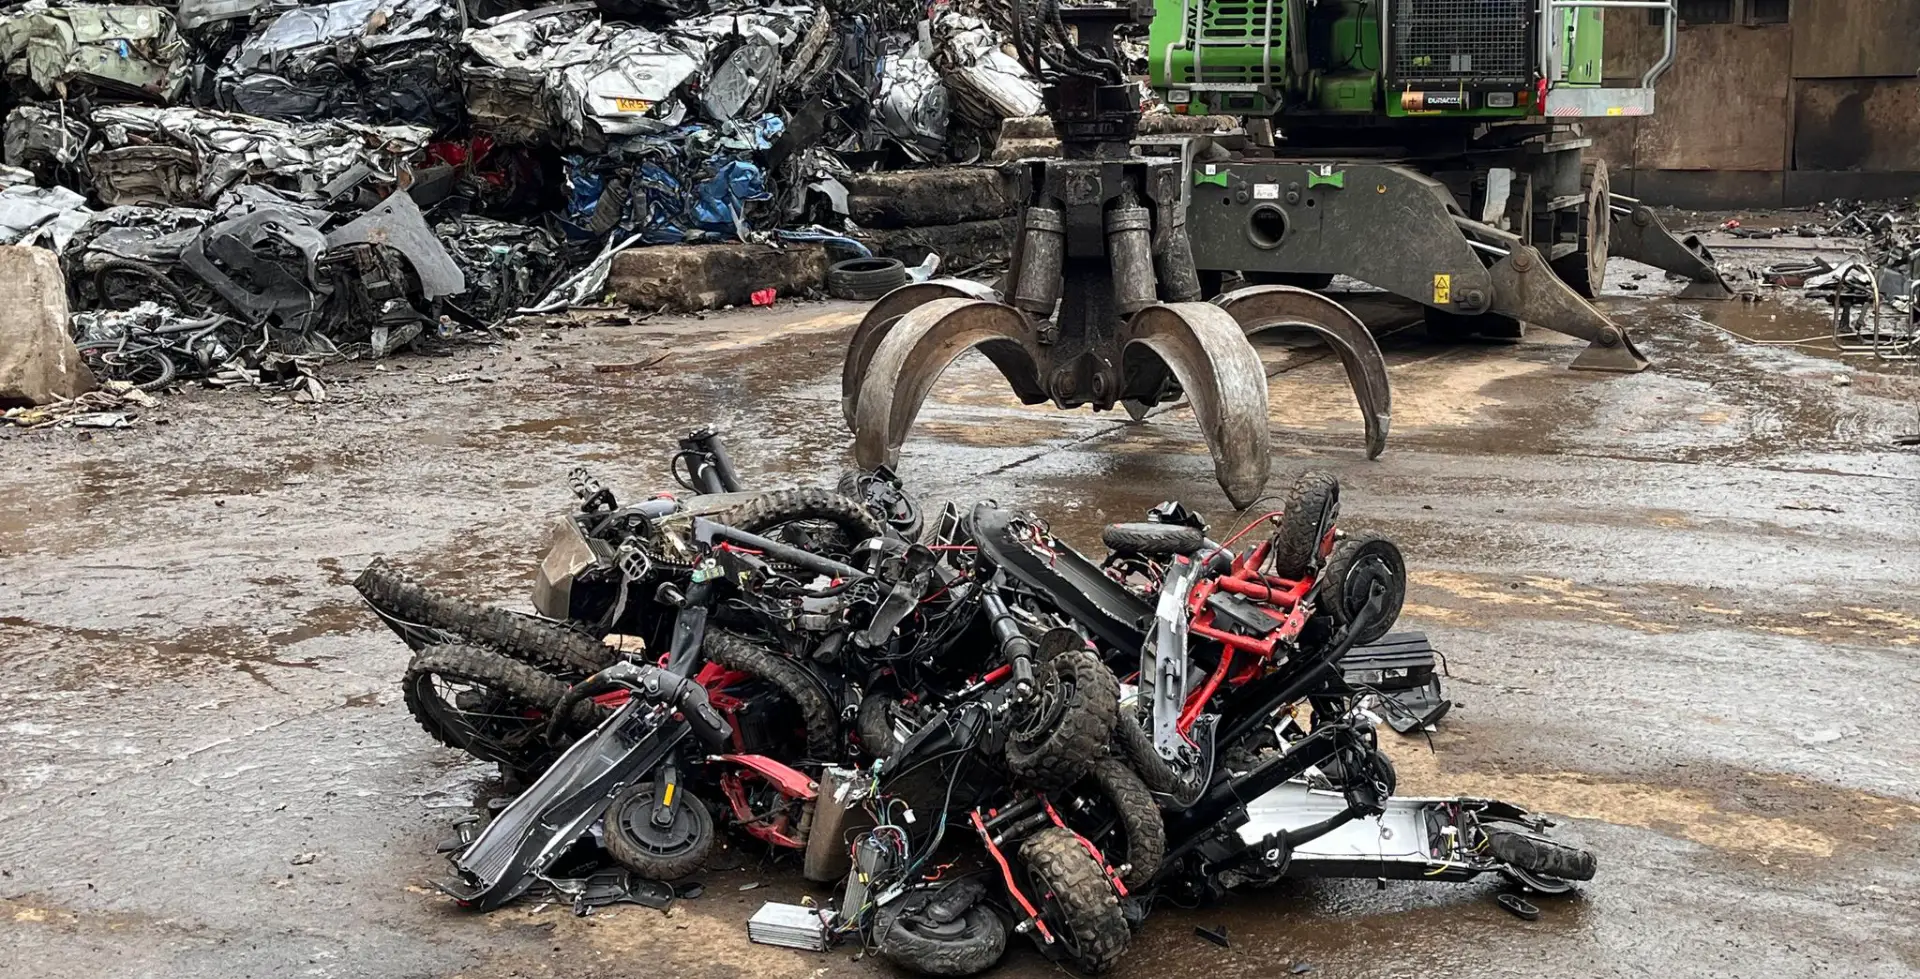 off road bikes and scooters ready to be crushed